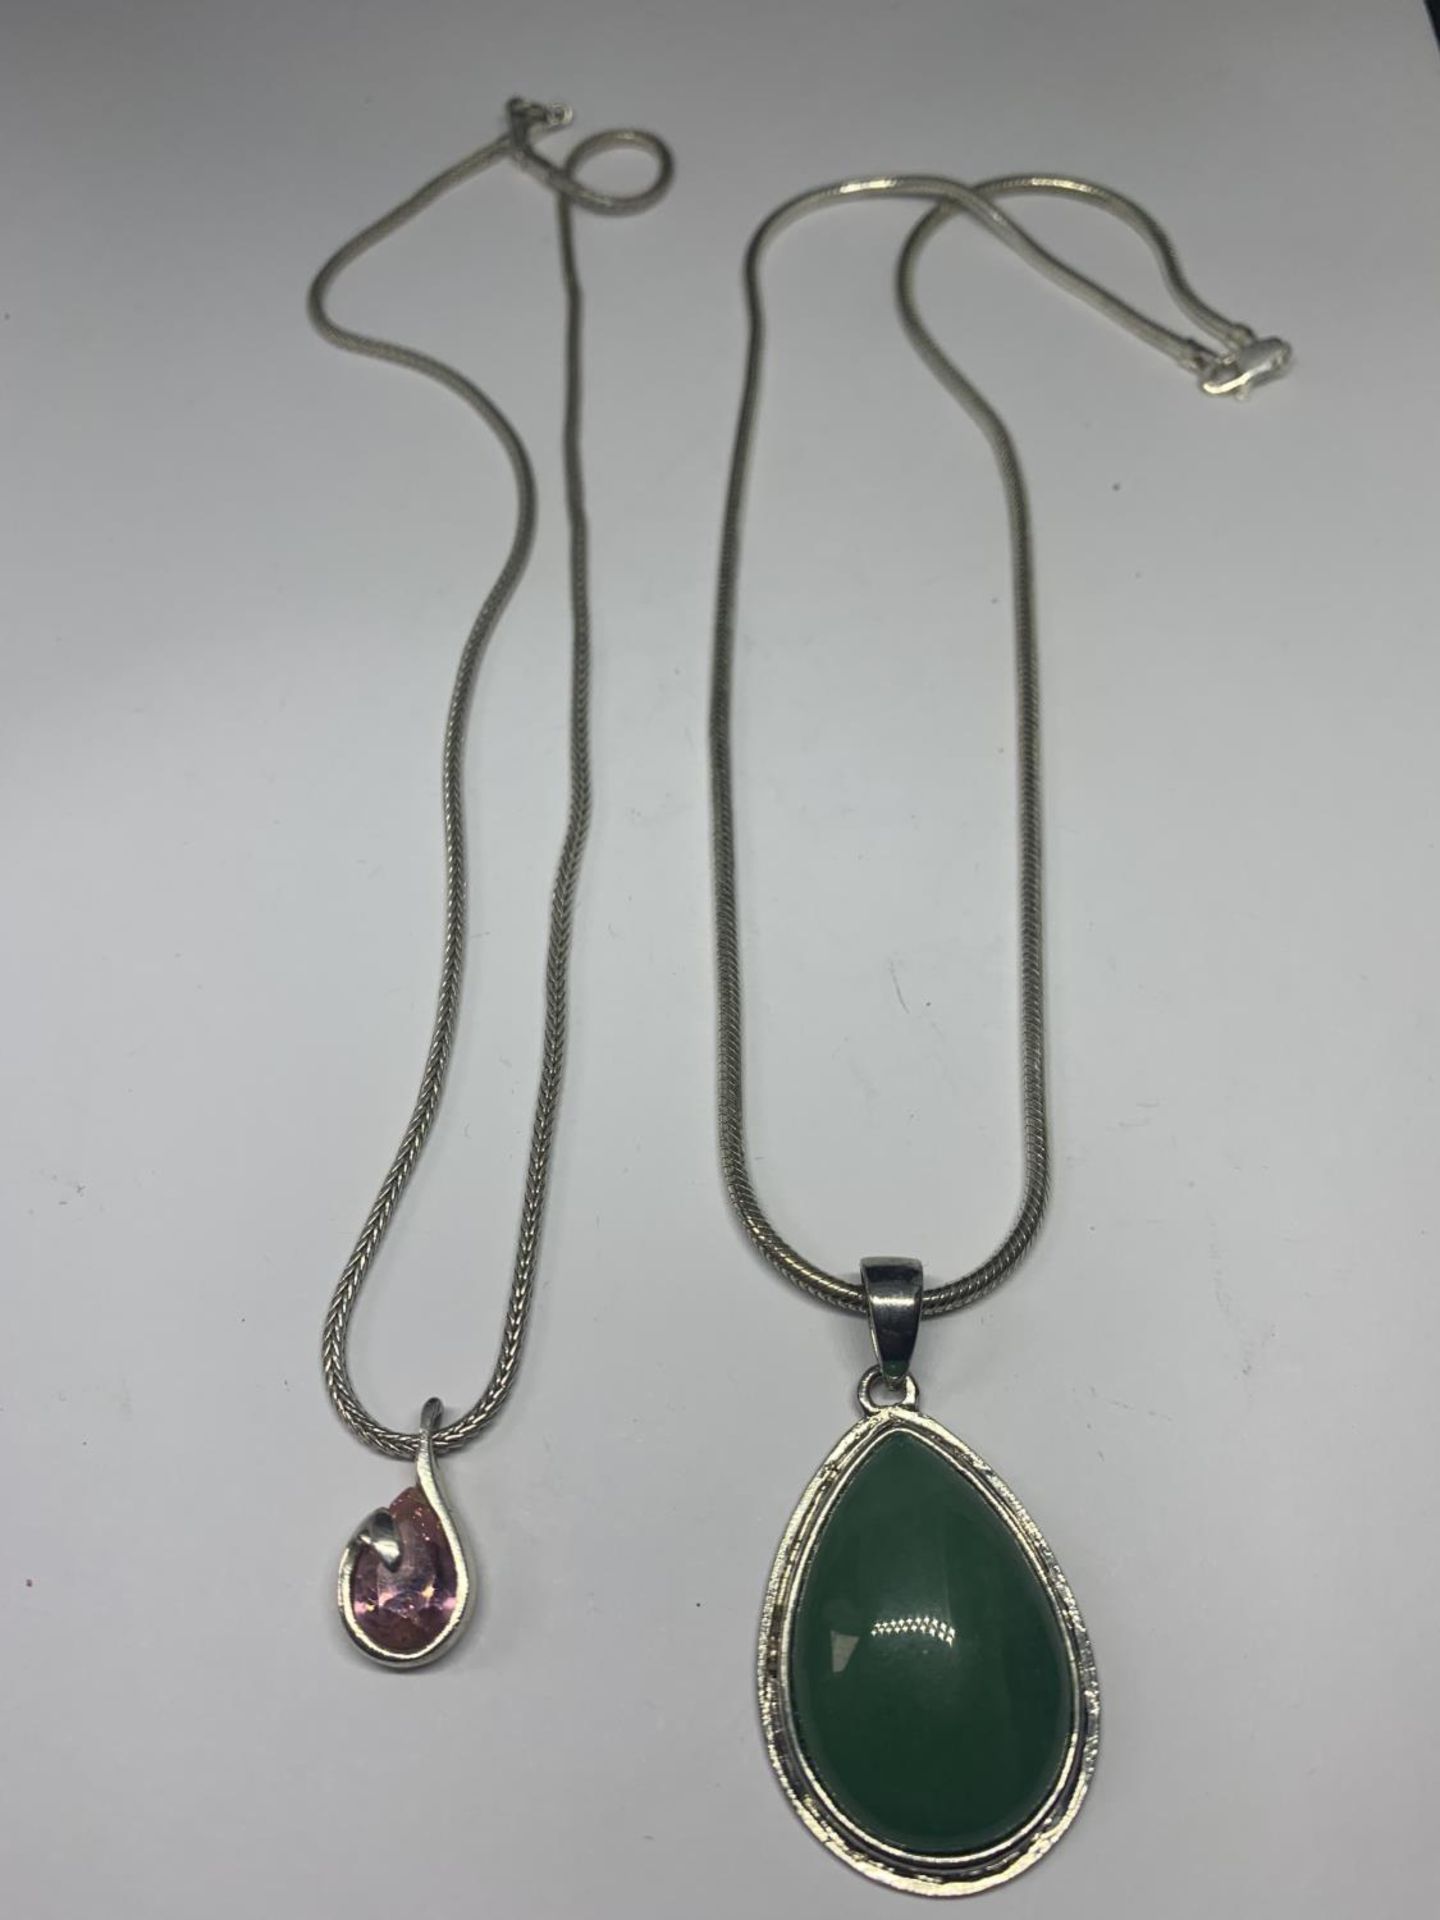 TWO SILVER NECKLACES WITH PENDANTS TO INCLUDE A LARGE GREEN TEARDROP AND A PINK EXAMPLE - Image 2 of 4